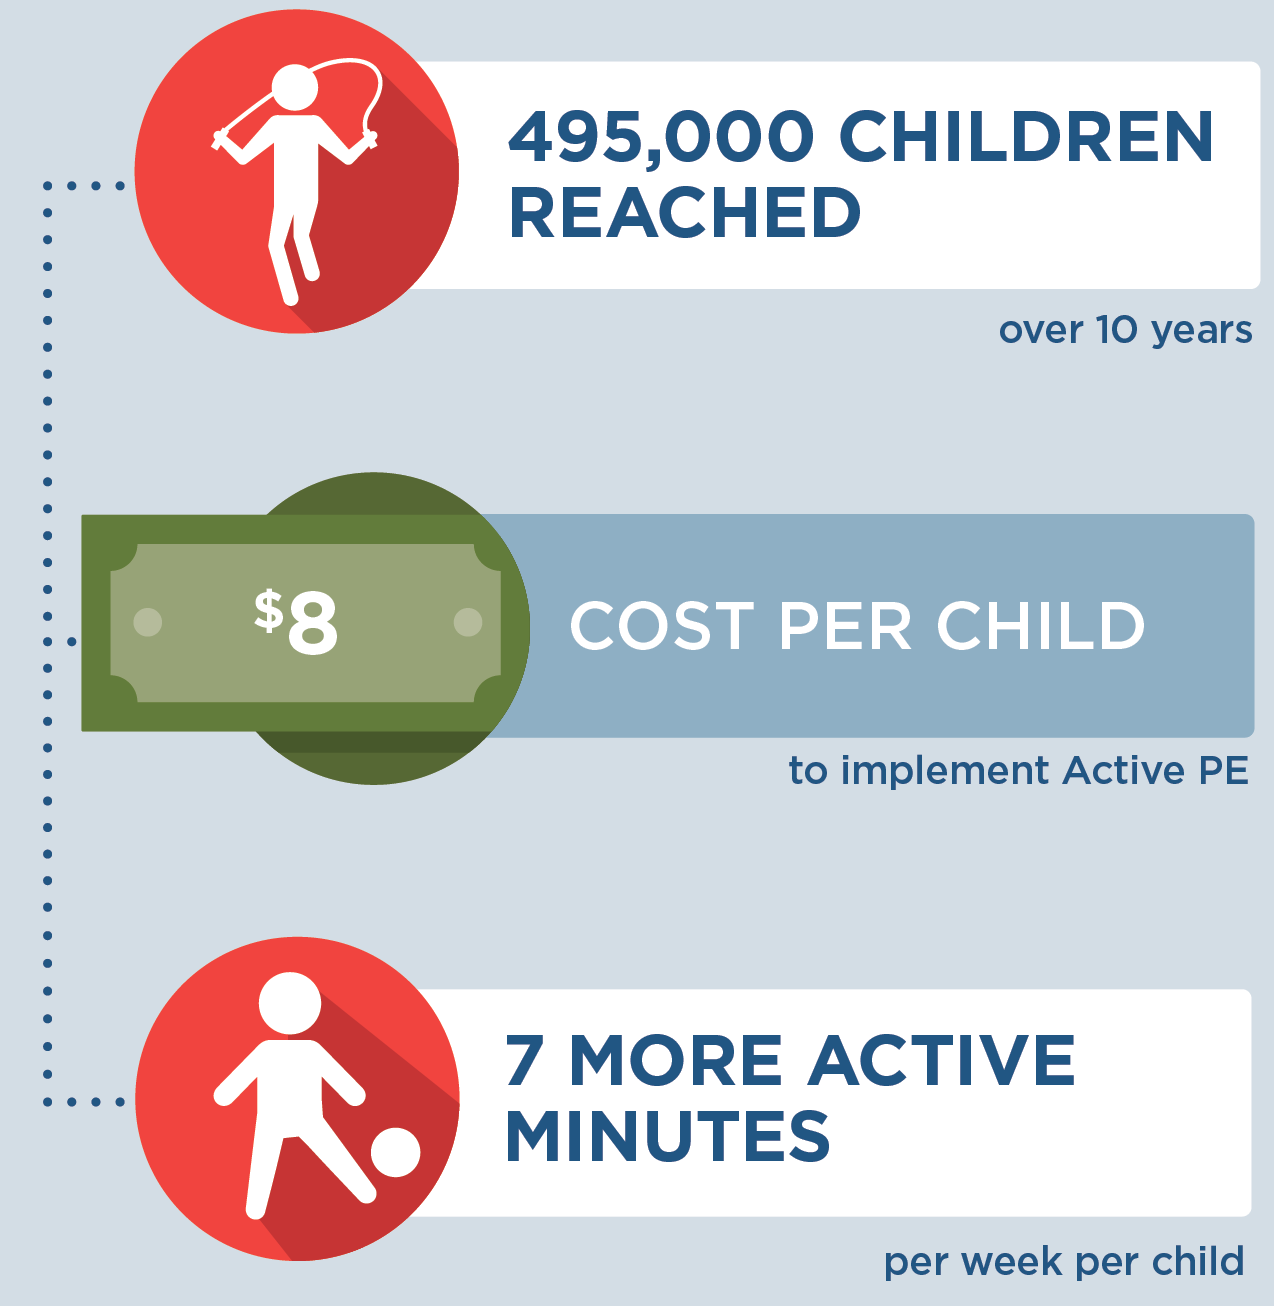 If Active PE was implemented in Iowa, then by the end of 2030, 495,000 children would be reach over 10 years. It would cost $8 per child to implement Active PE. Each child would get 7 more active minutes per week.